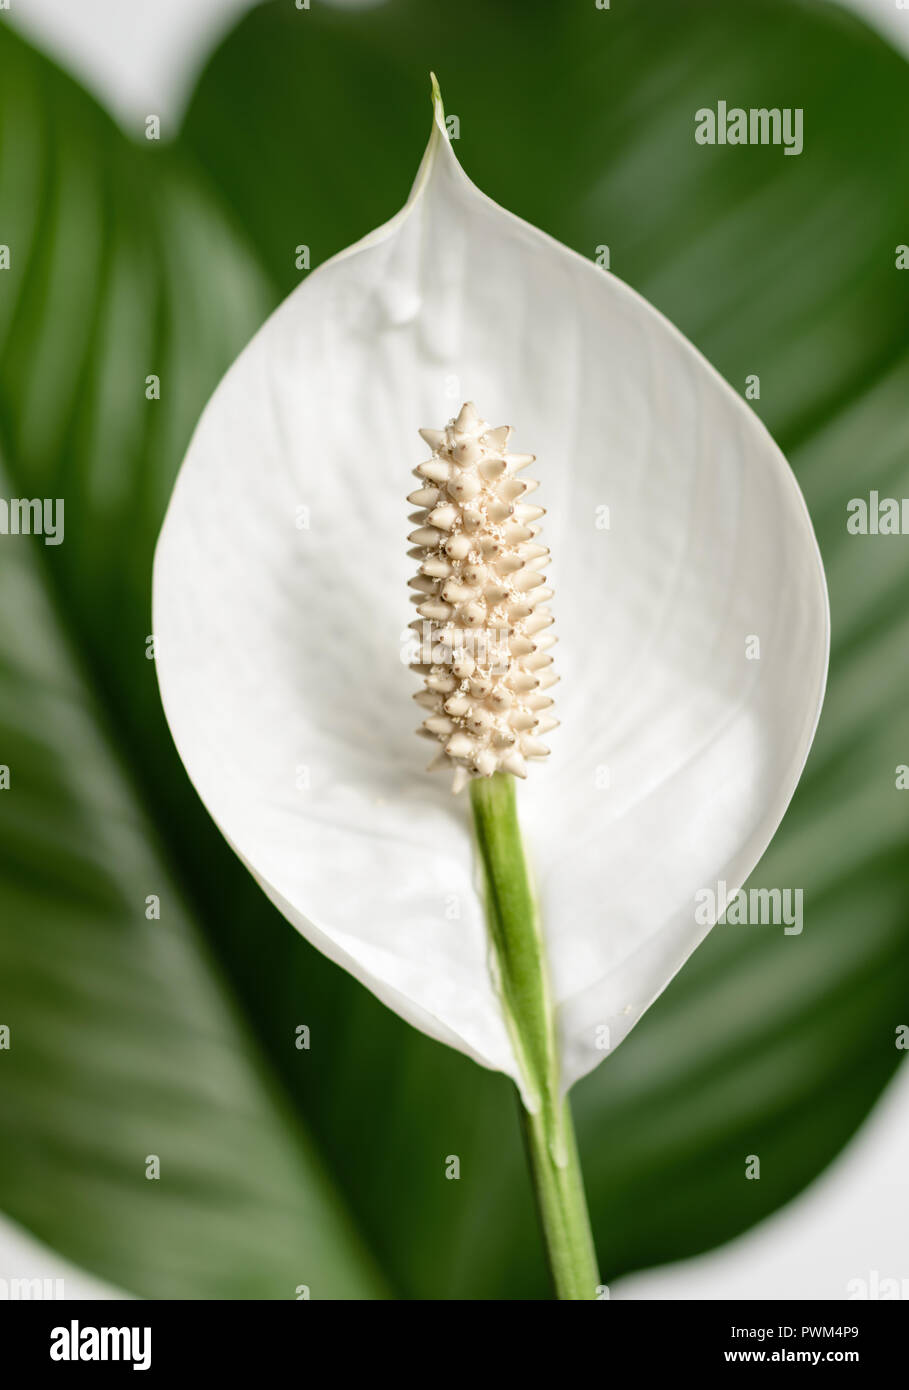 Blossom flower of spathiphyllum wallisii spath lily araceae home plant Stock Photo